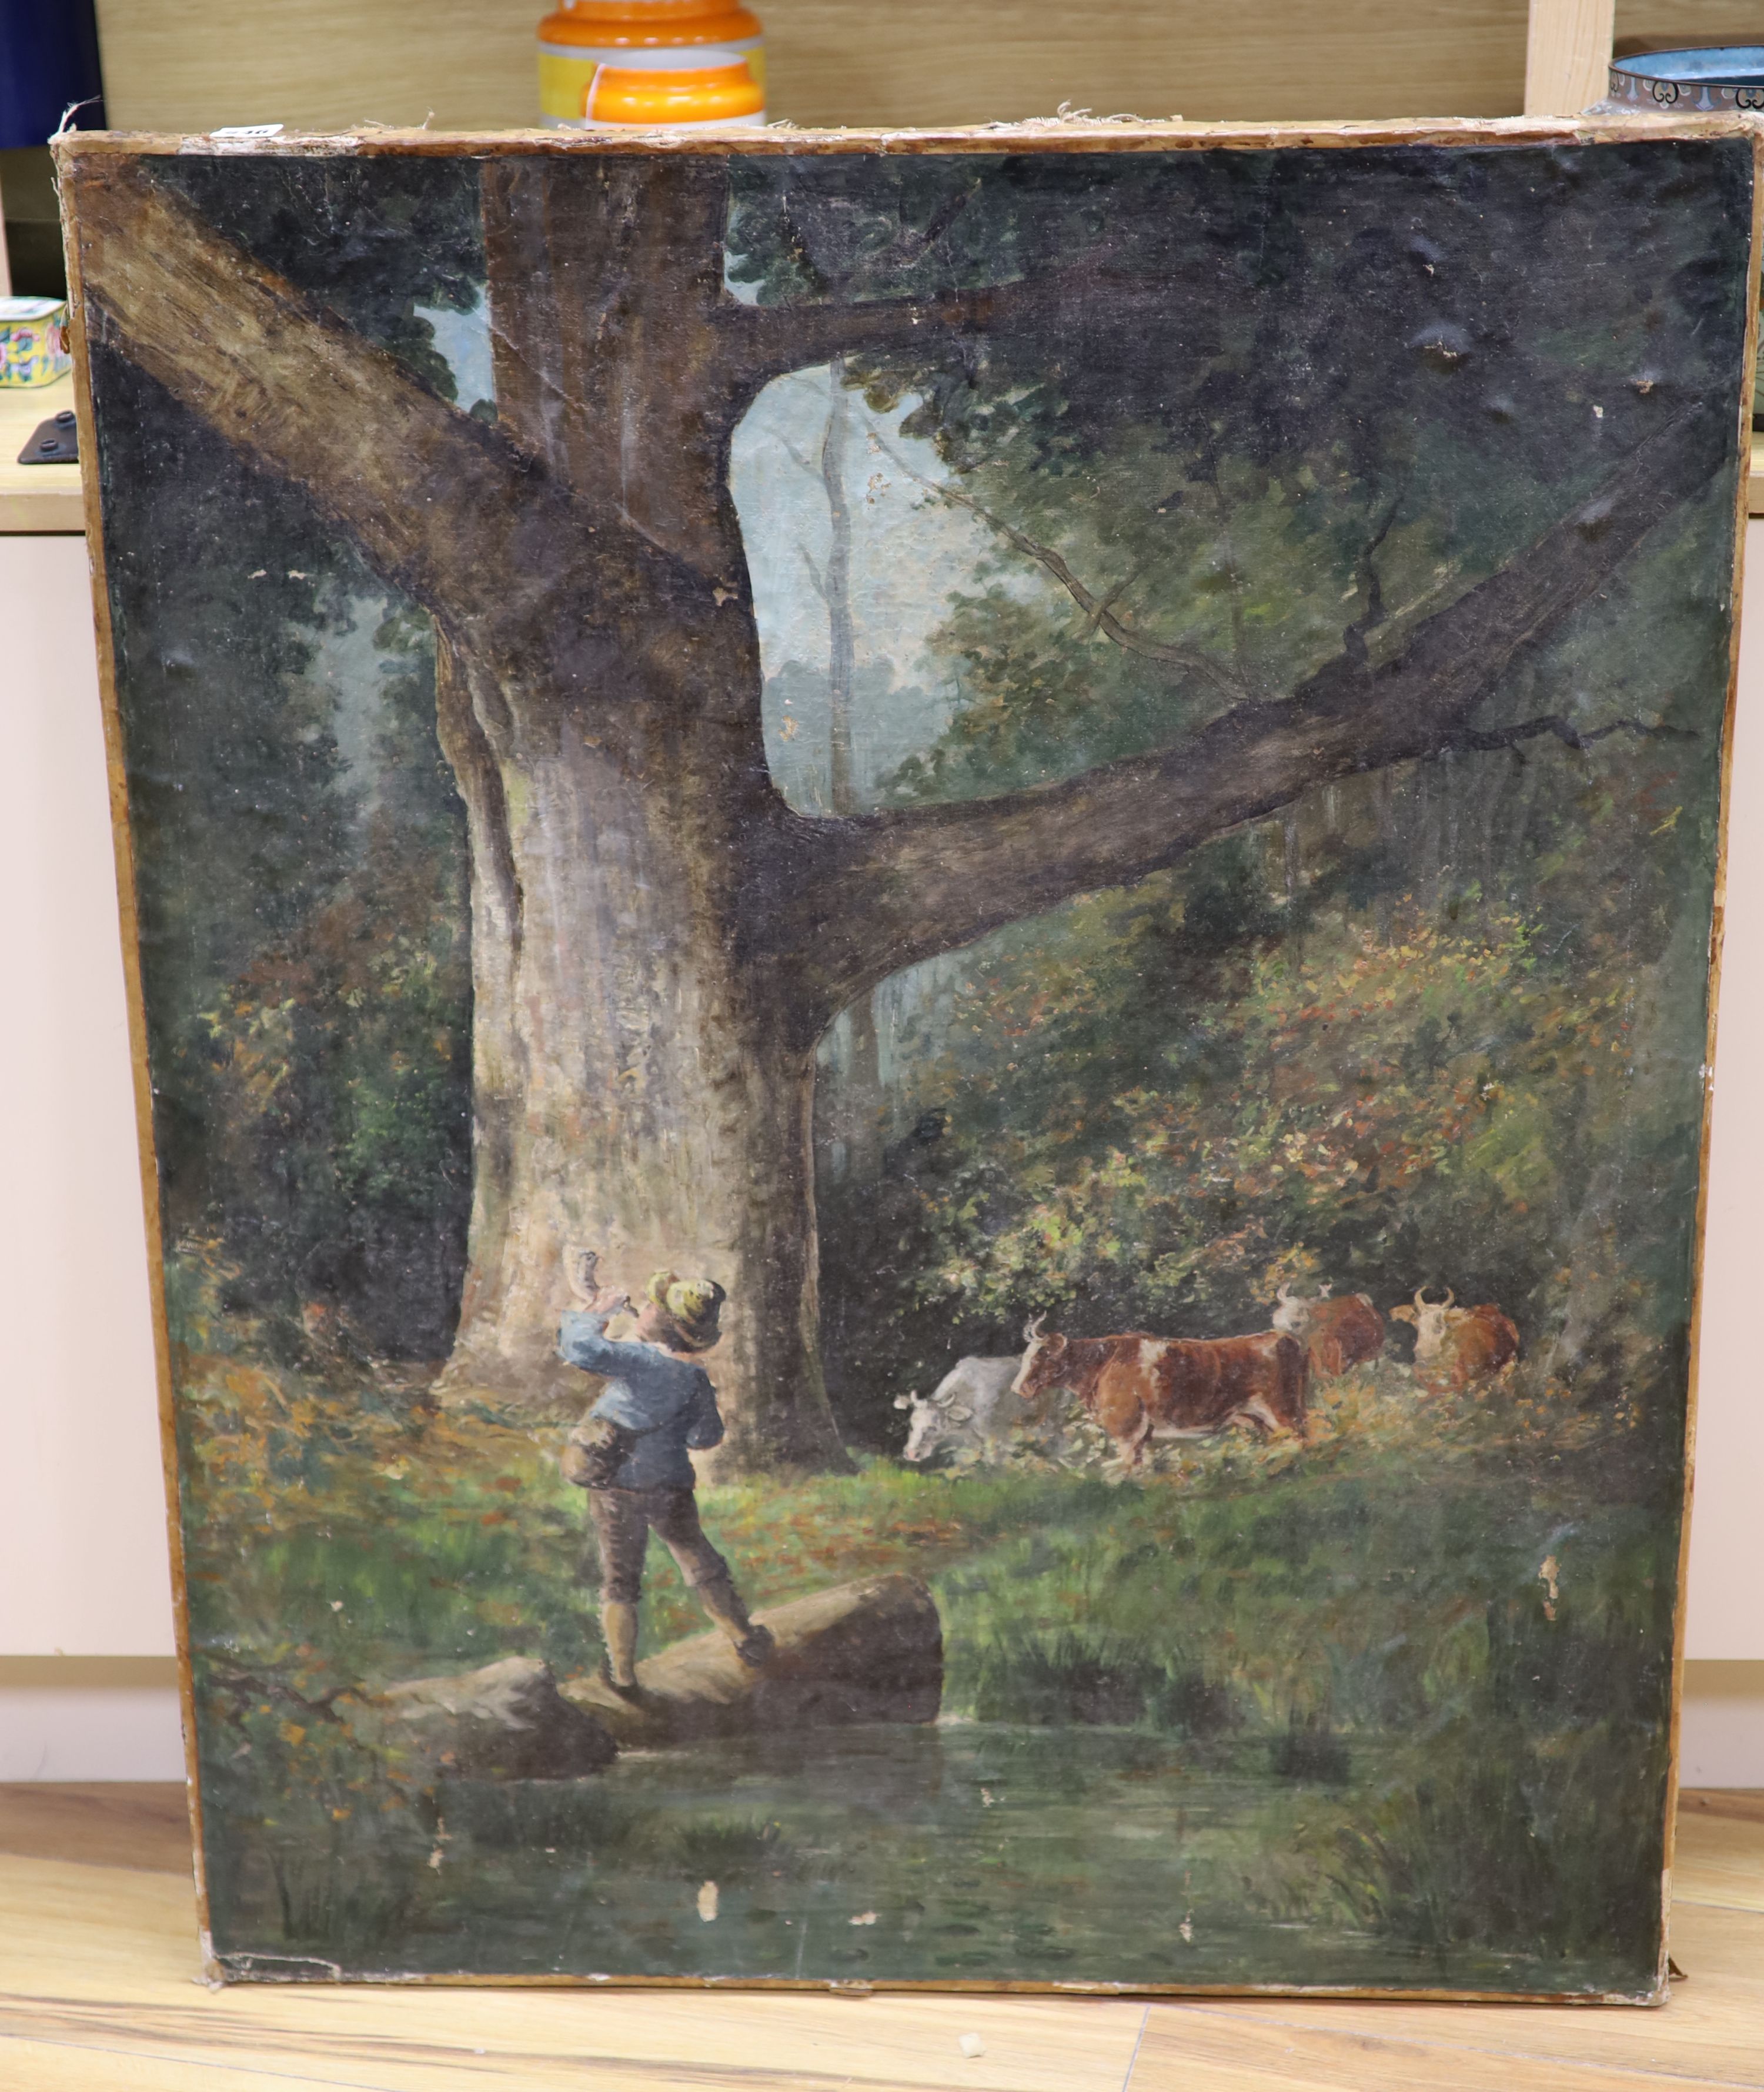 19th century European school, study of cattle below an ancient tree, a young boy sounding a horn stands beside a pond to the foreground, oil on canvas, unsigned, unframed